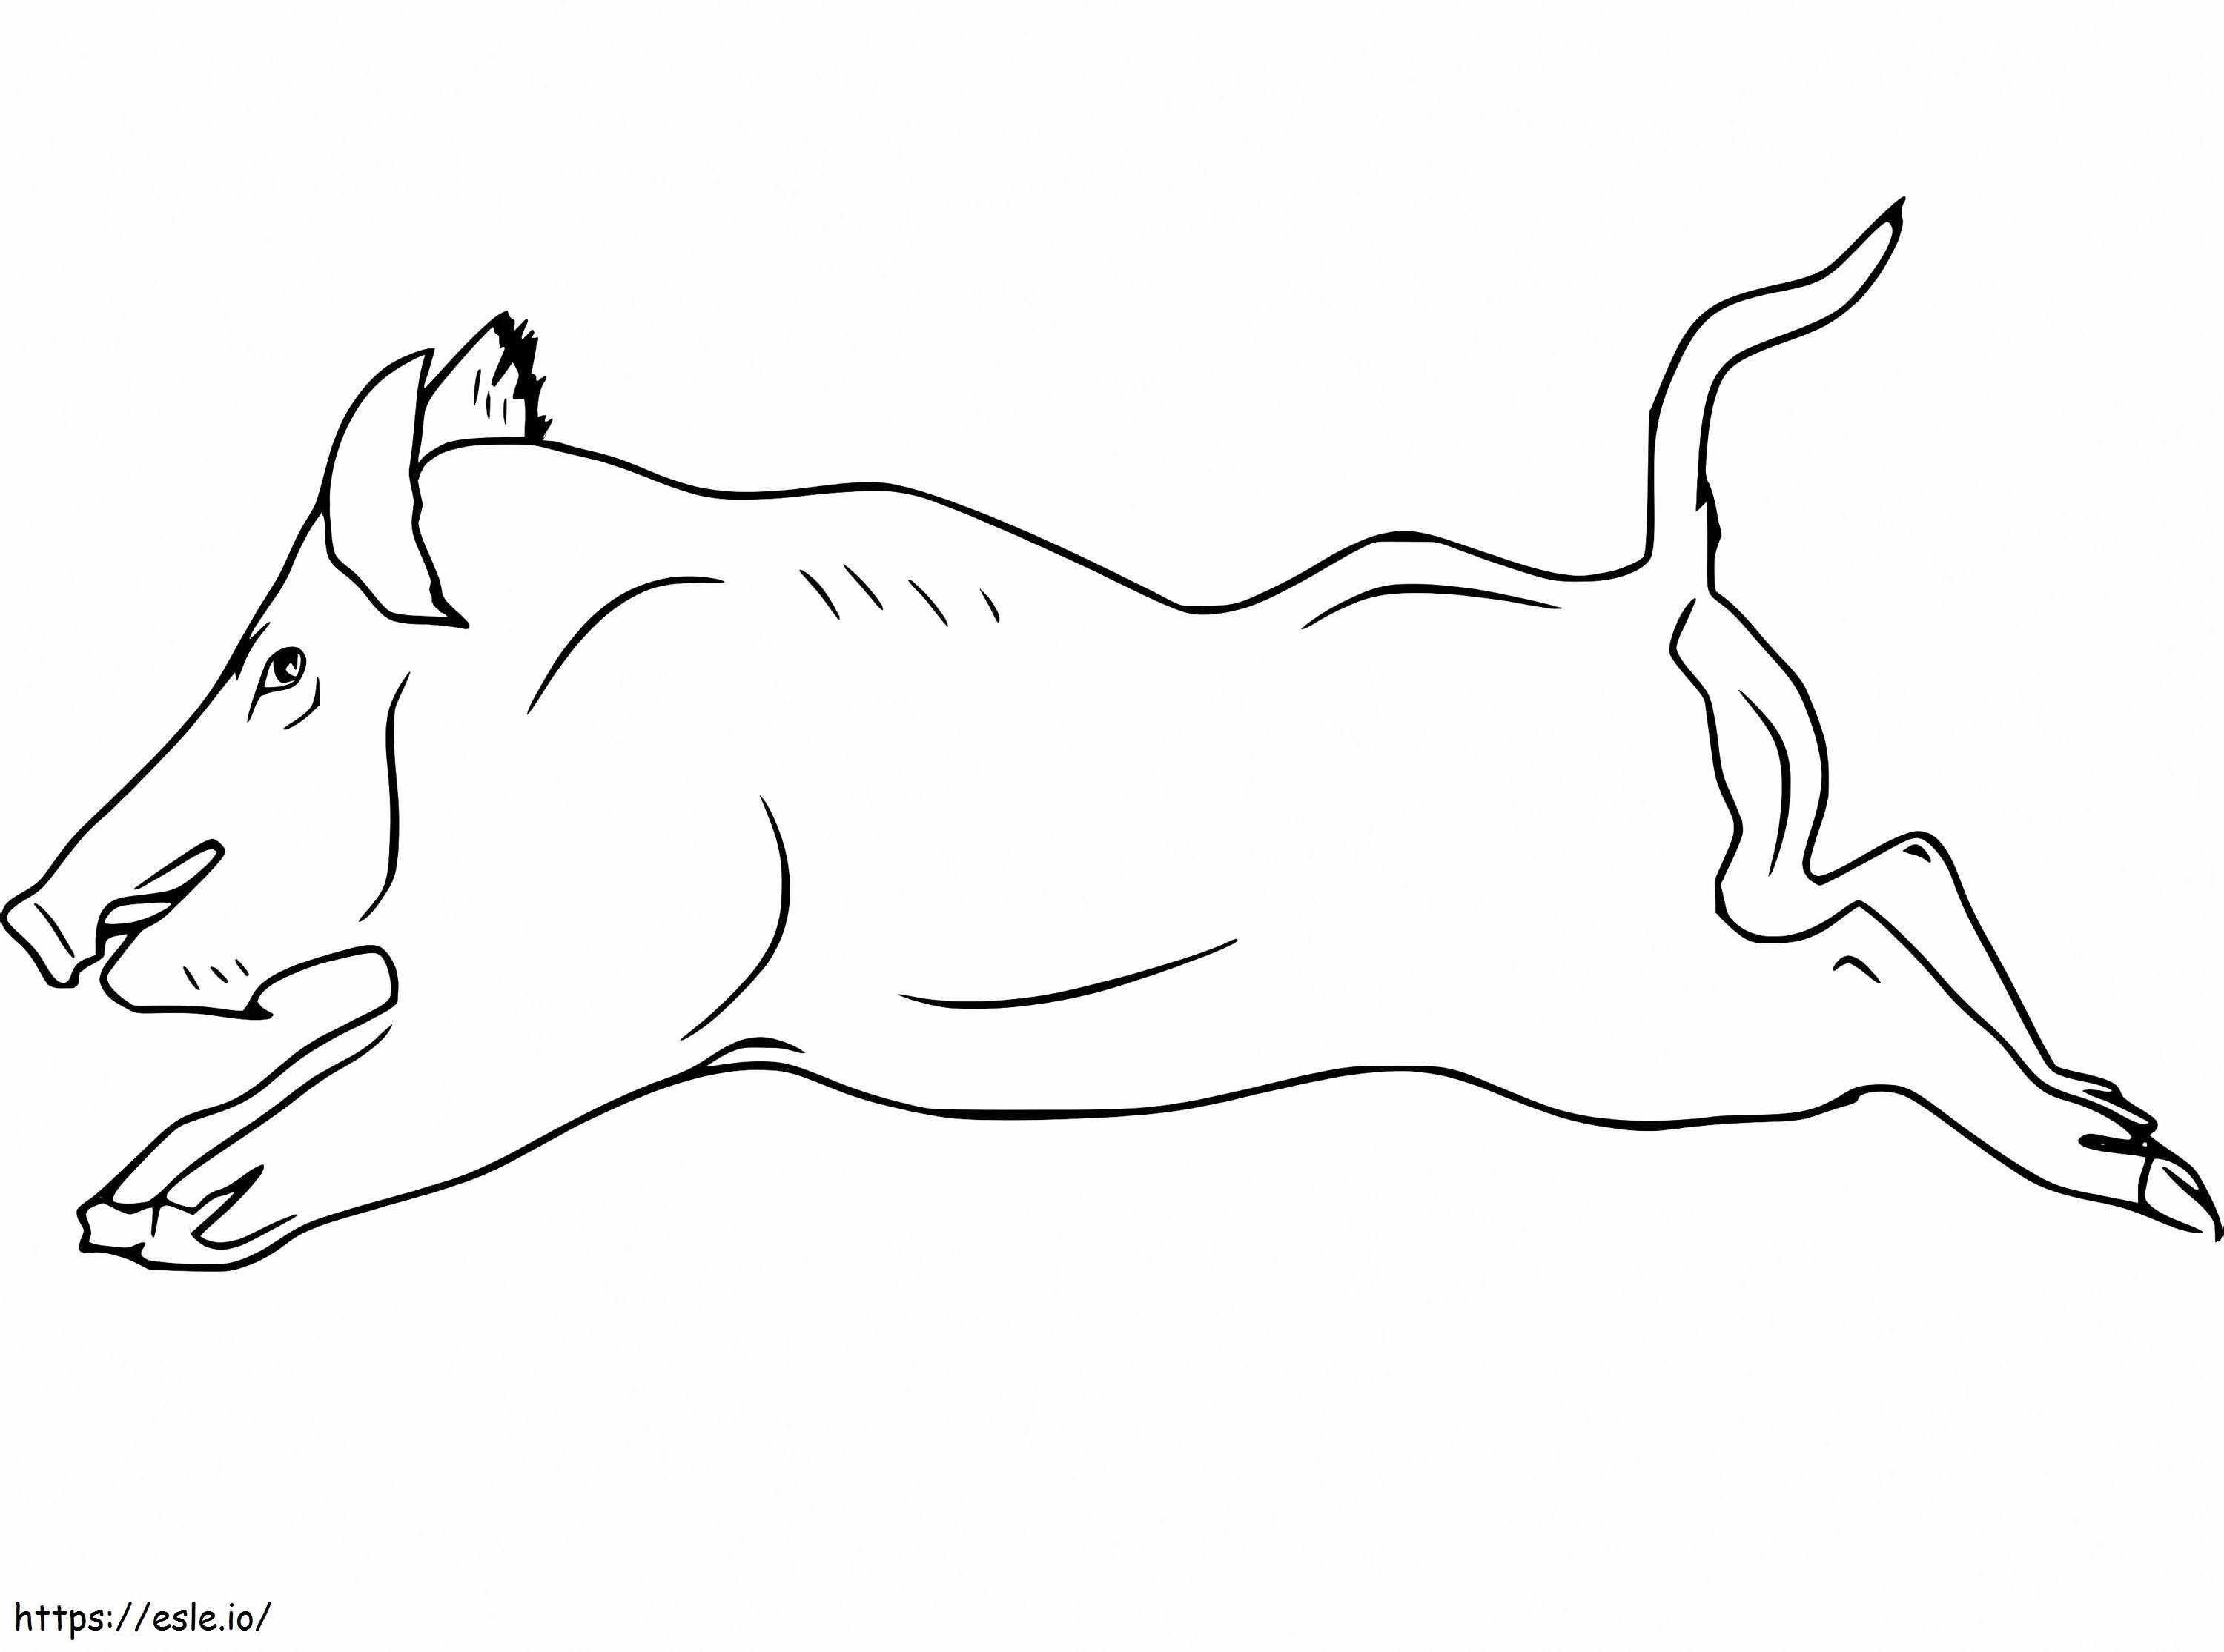 Wild Boar Basic Race coloring page